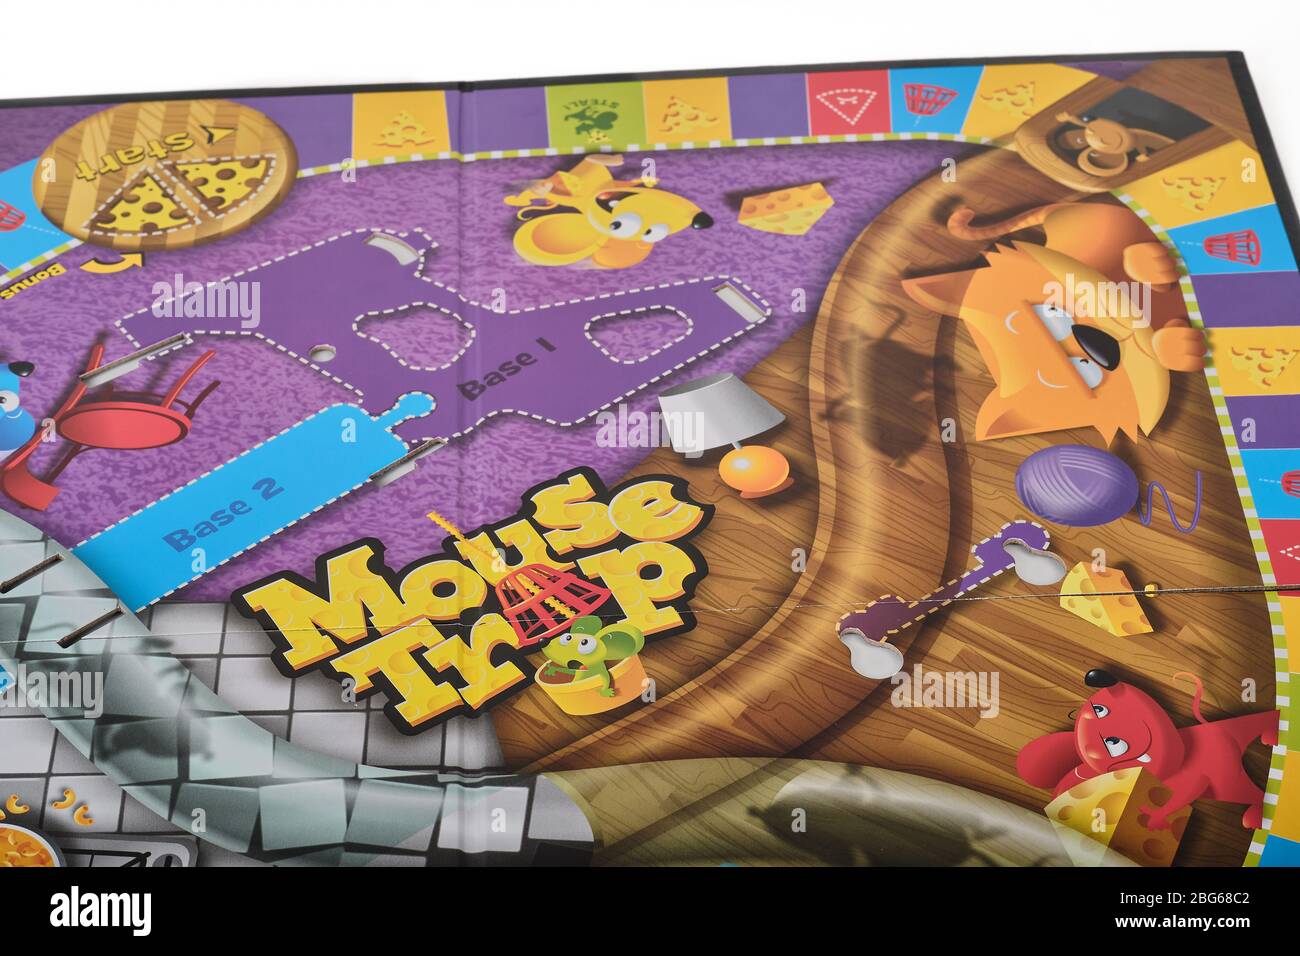 https://c8.alamy.com/comp/2BG68C2/close-up-of-hasbro-mouse-trap-board-game-board-ready-for-game-pieces-to-be-assembled-onto-it-2BG68C2.jpg